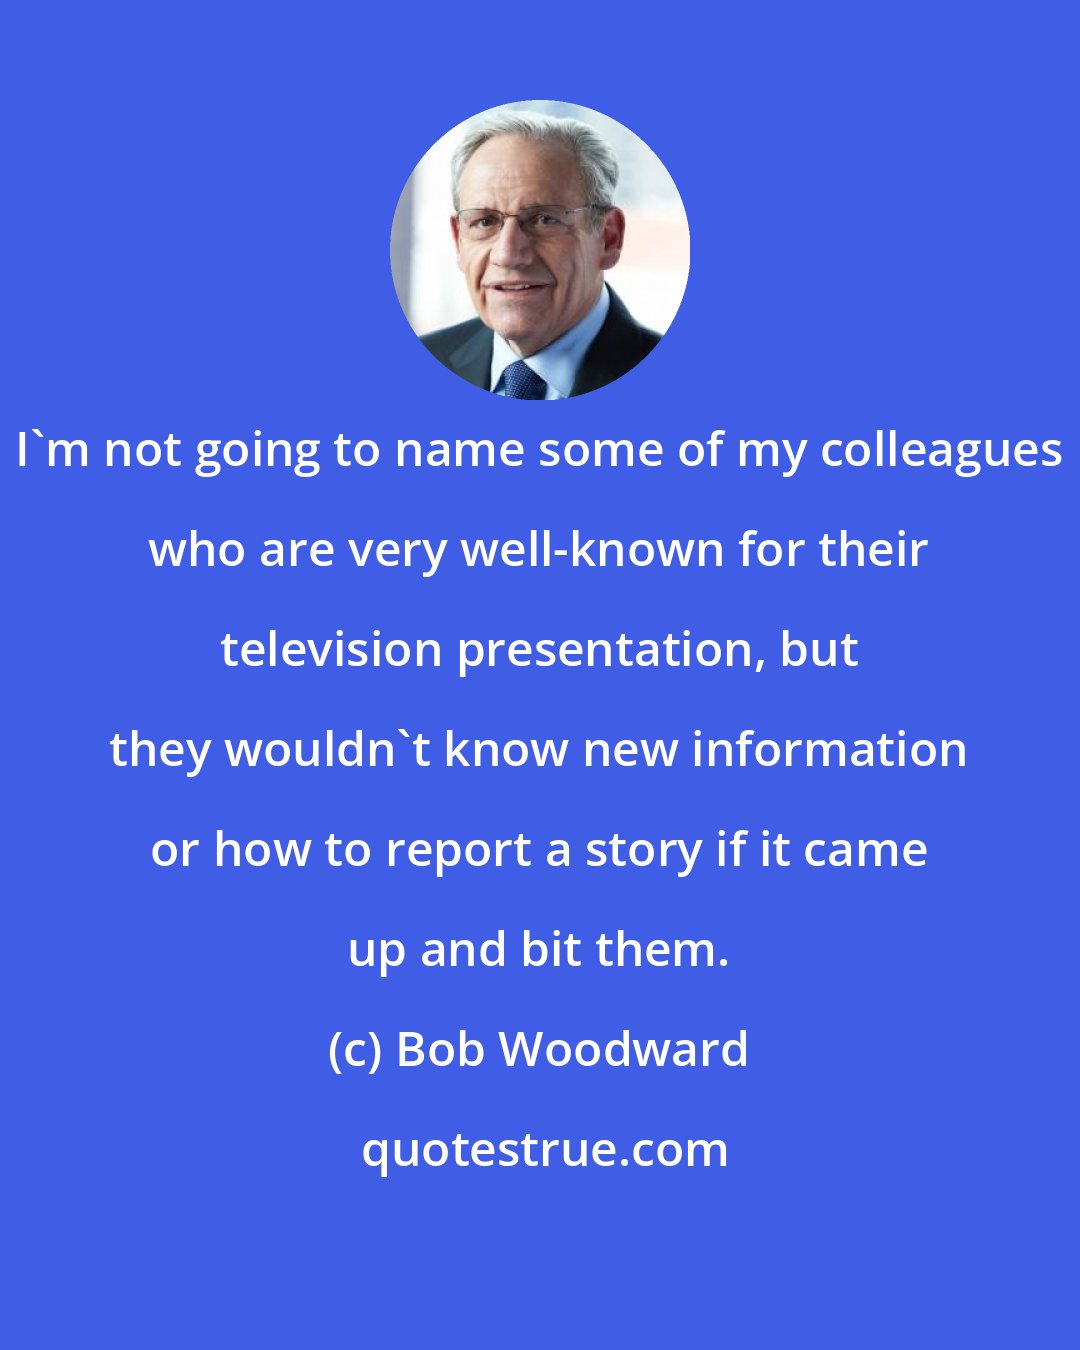 Bob Woodward: I'm not going to name some of my colleagues who are very well-known for their television presentation, but they wouldn't know new information or how to report a story if it came up and bit them.